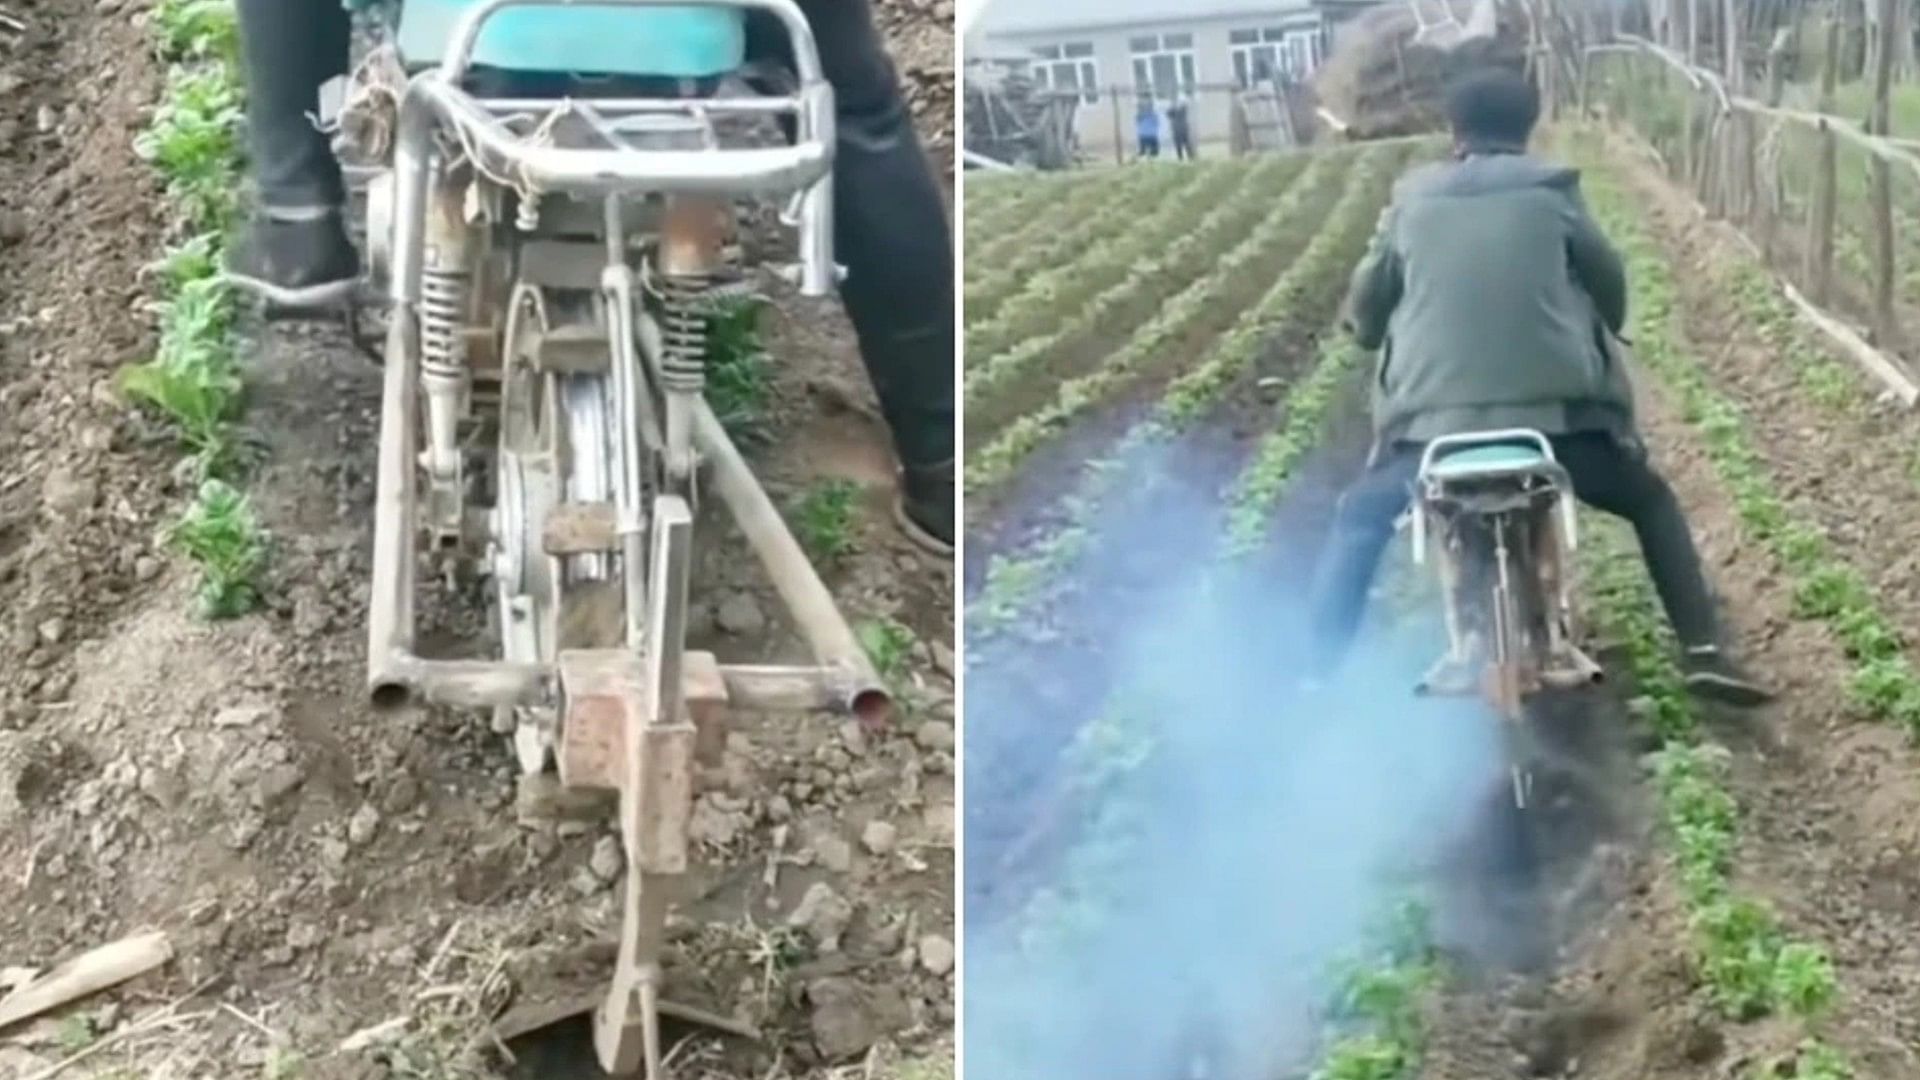 Desi Jugad Video Man Converted a Bike Into Plough video is going viral on social media